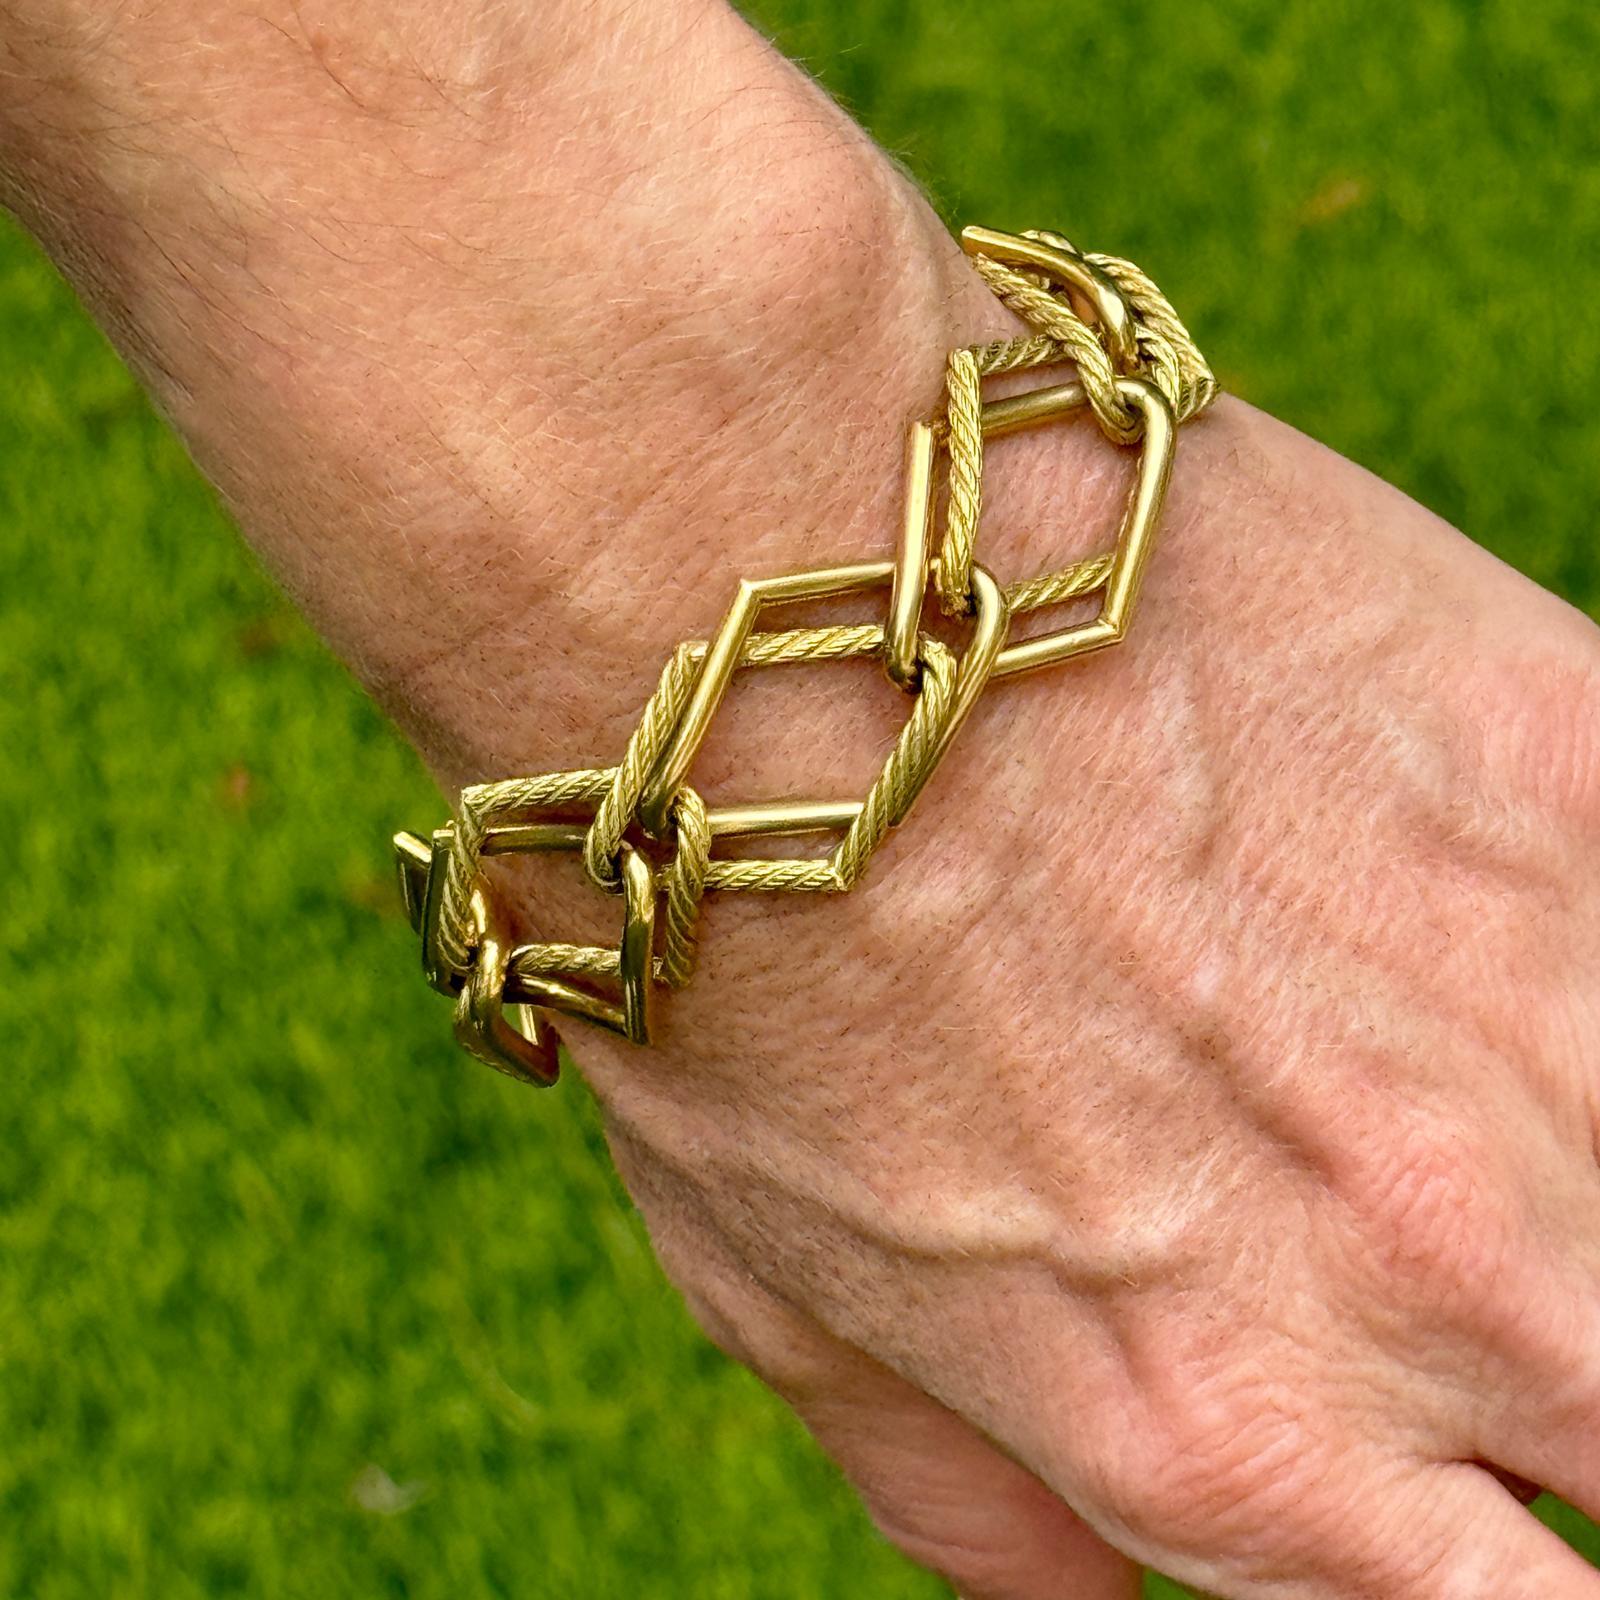 Fabulous 1960's vintage link bracelet crafted in 18 karat yellow gold. The textured rope and polished open links measure 8.00 inches in length and approximately .75 inches in width. The bracelet has not been polished to keep it's original patina